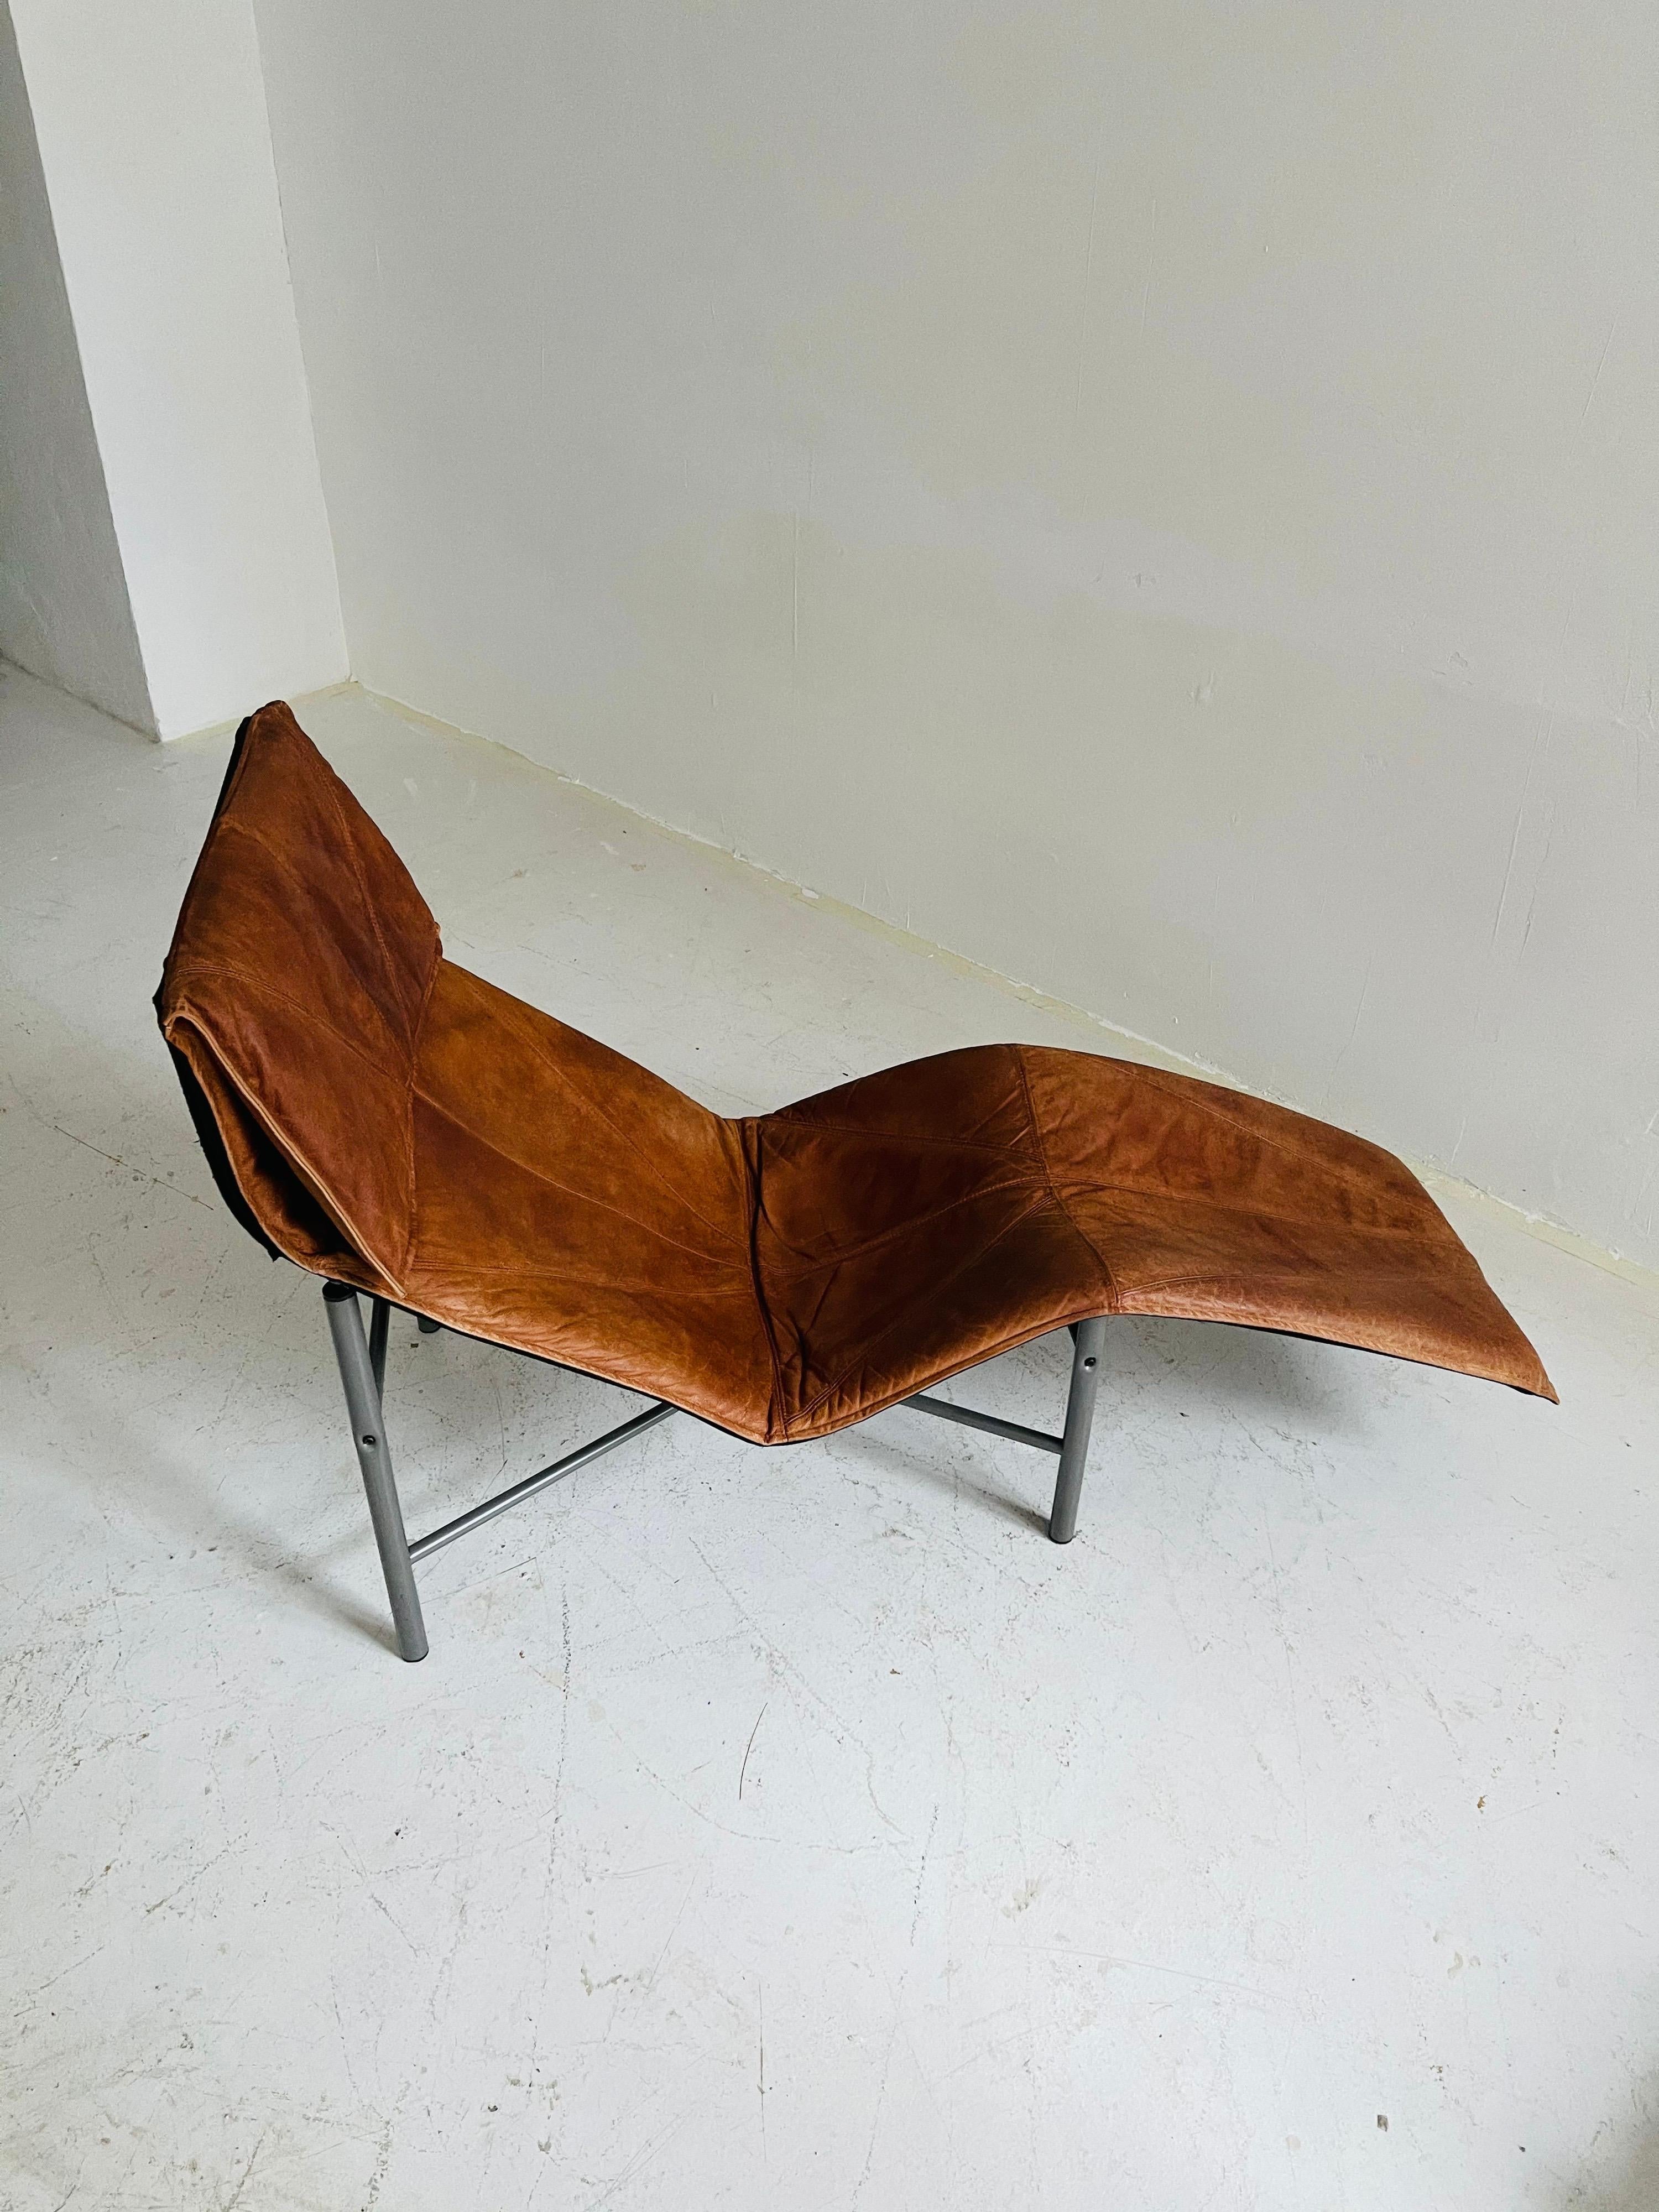 Patinated Cognac Leather Chaise Longue by Tord Bjorklund, Sweden, 1970 In Good Condition For Sale In Vienna, AT